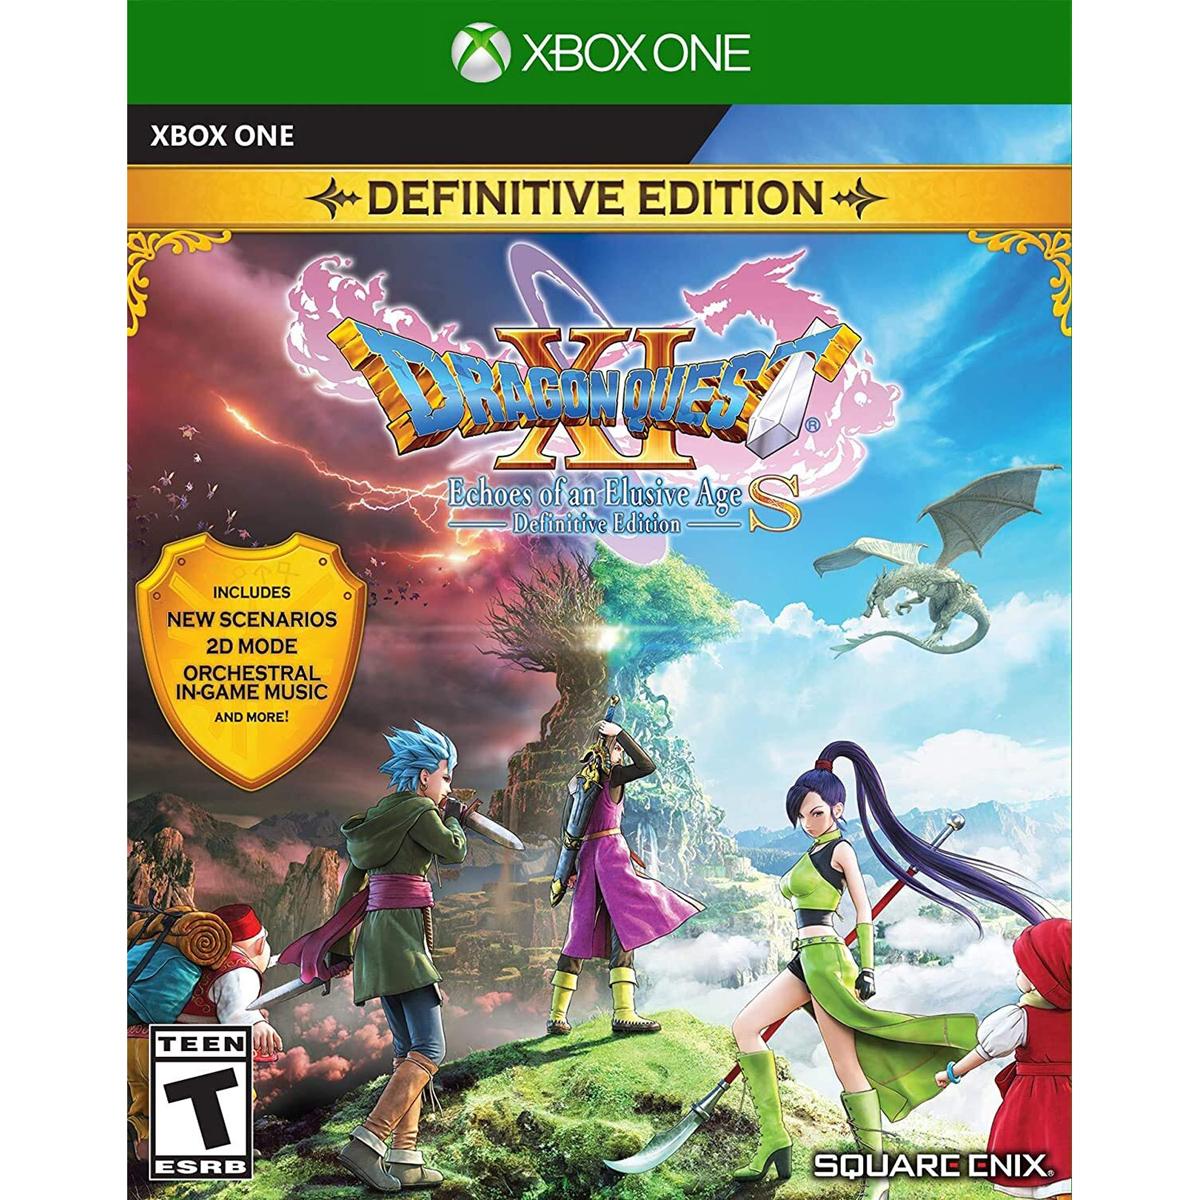 Dragon Quest XI S Xbox One for $24.99